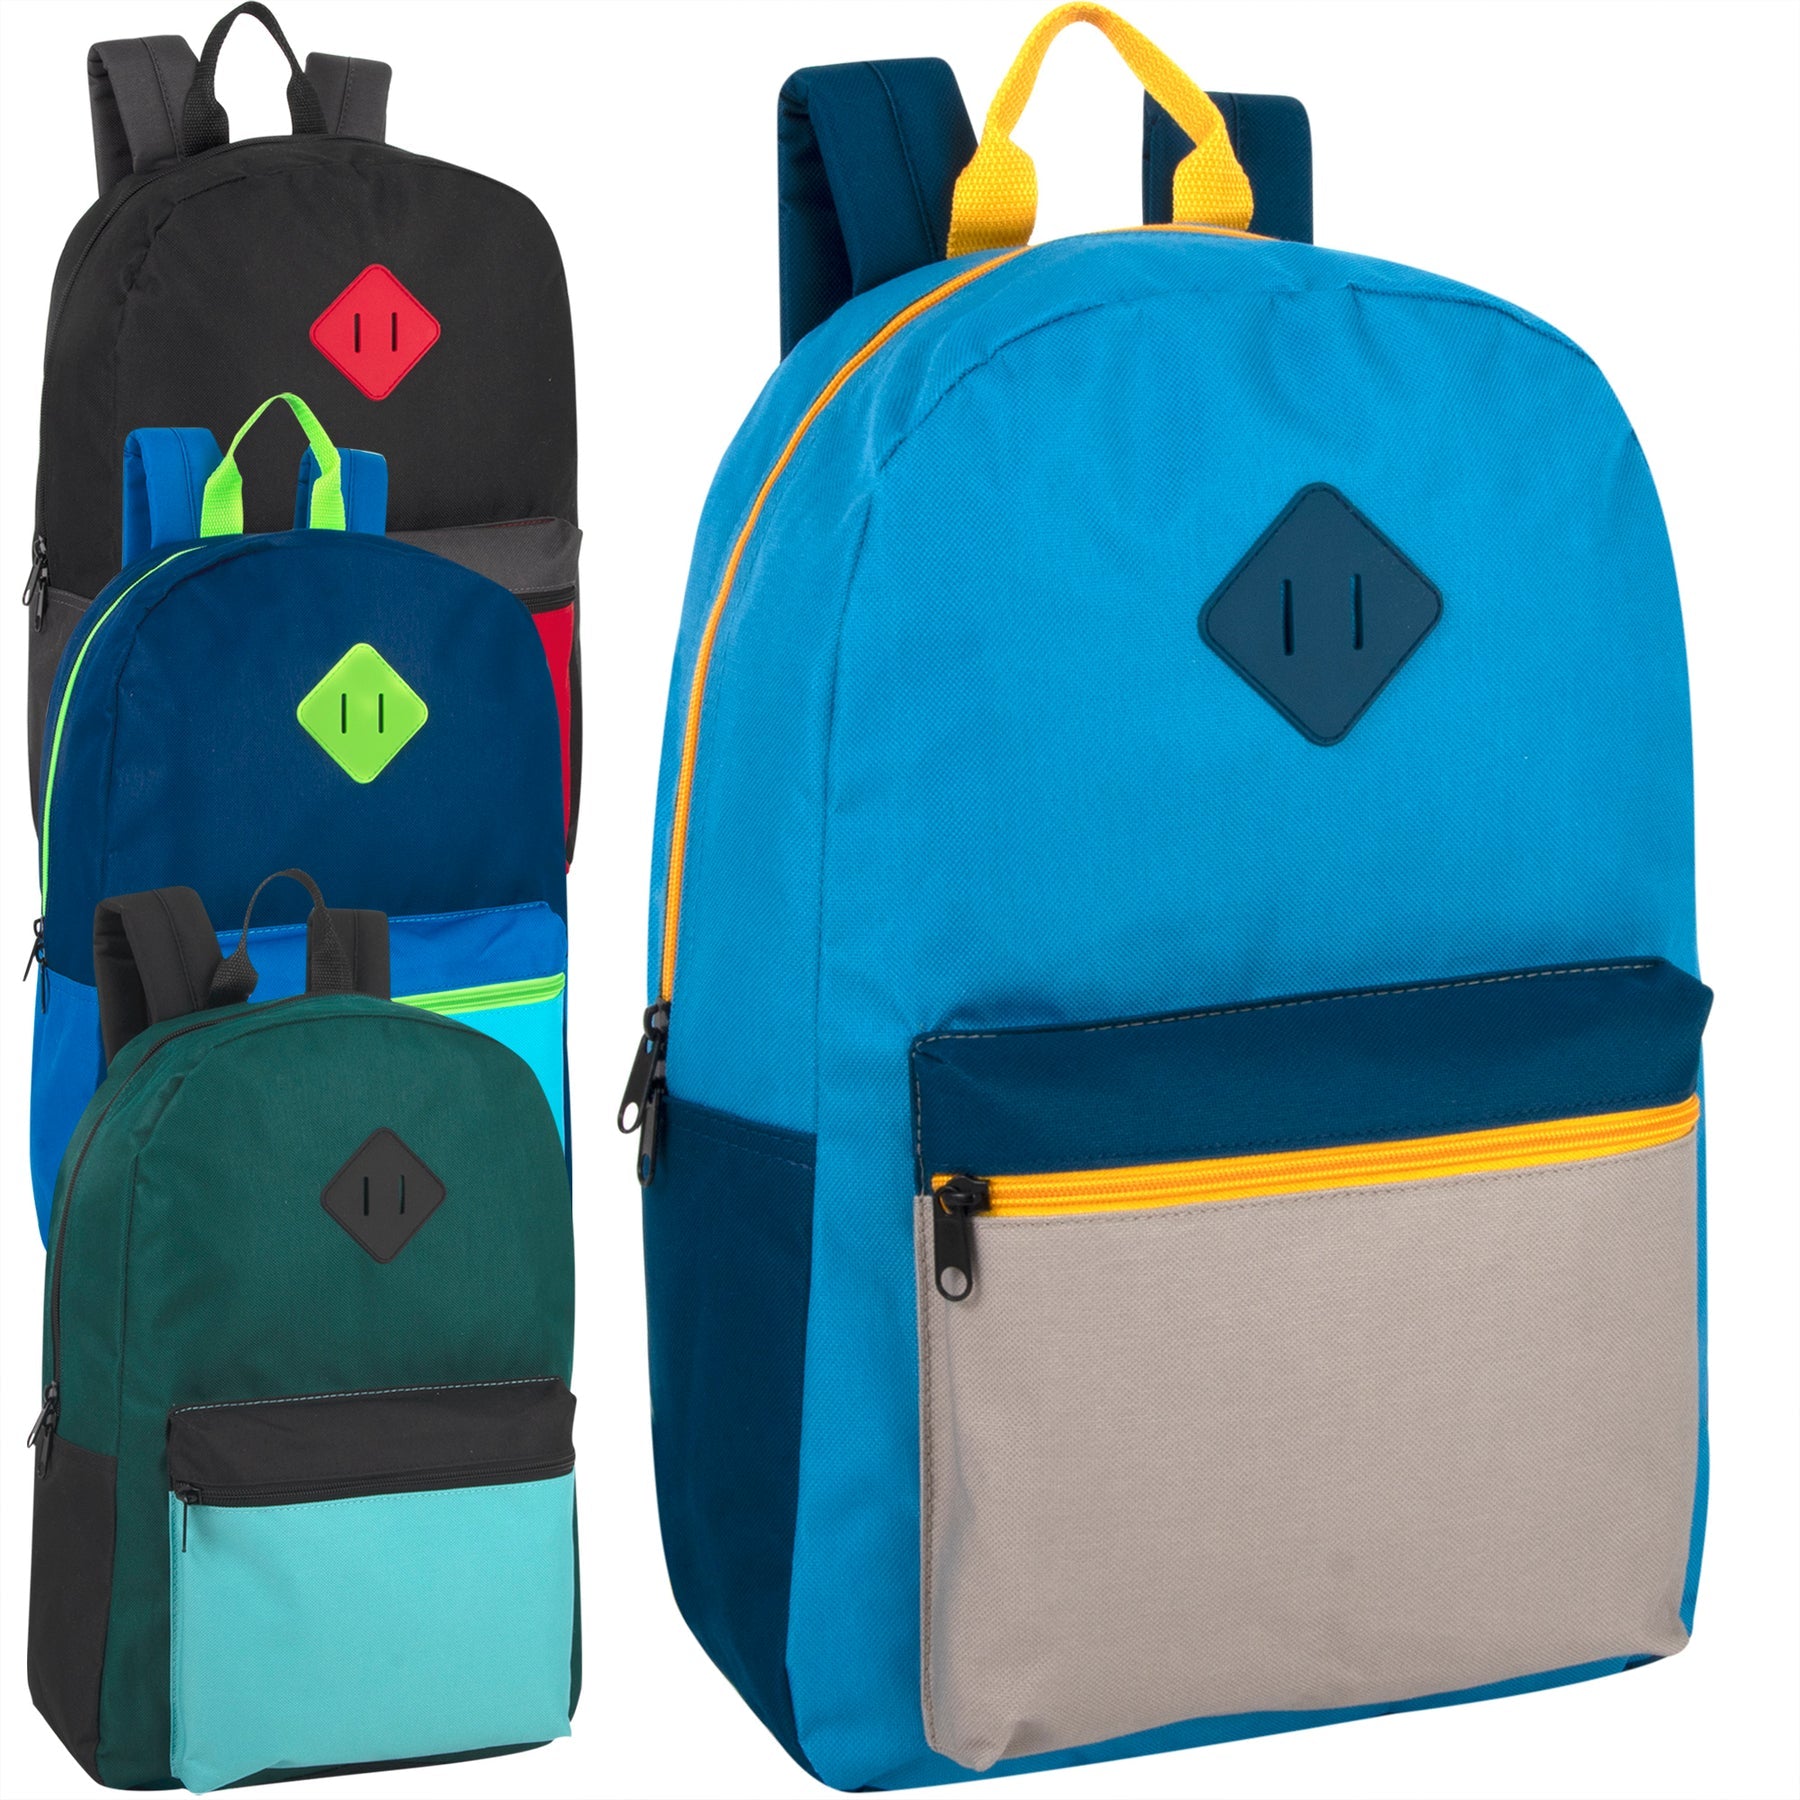 ColorPAQ Denim Red & Neon Blue Color-Change Backpack